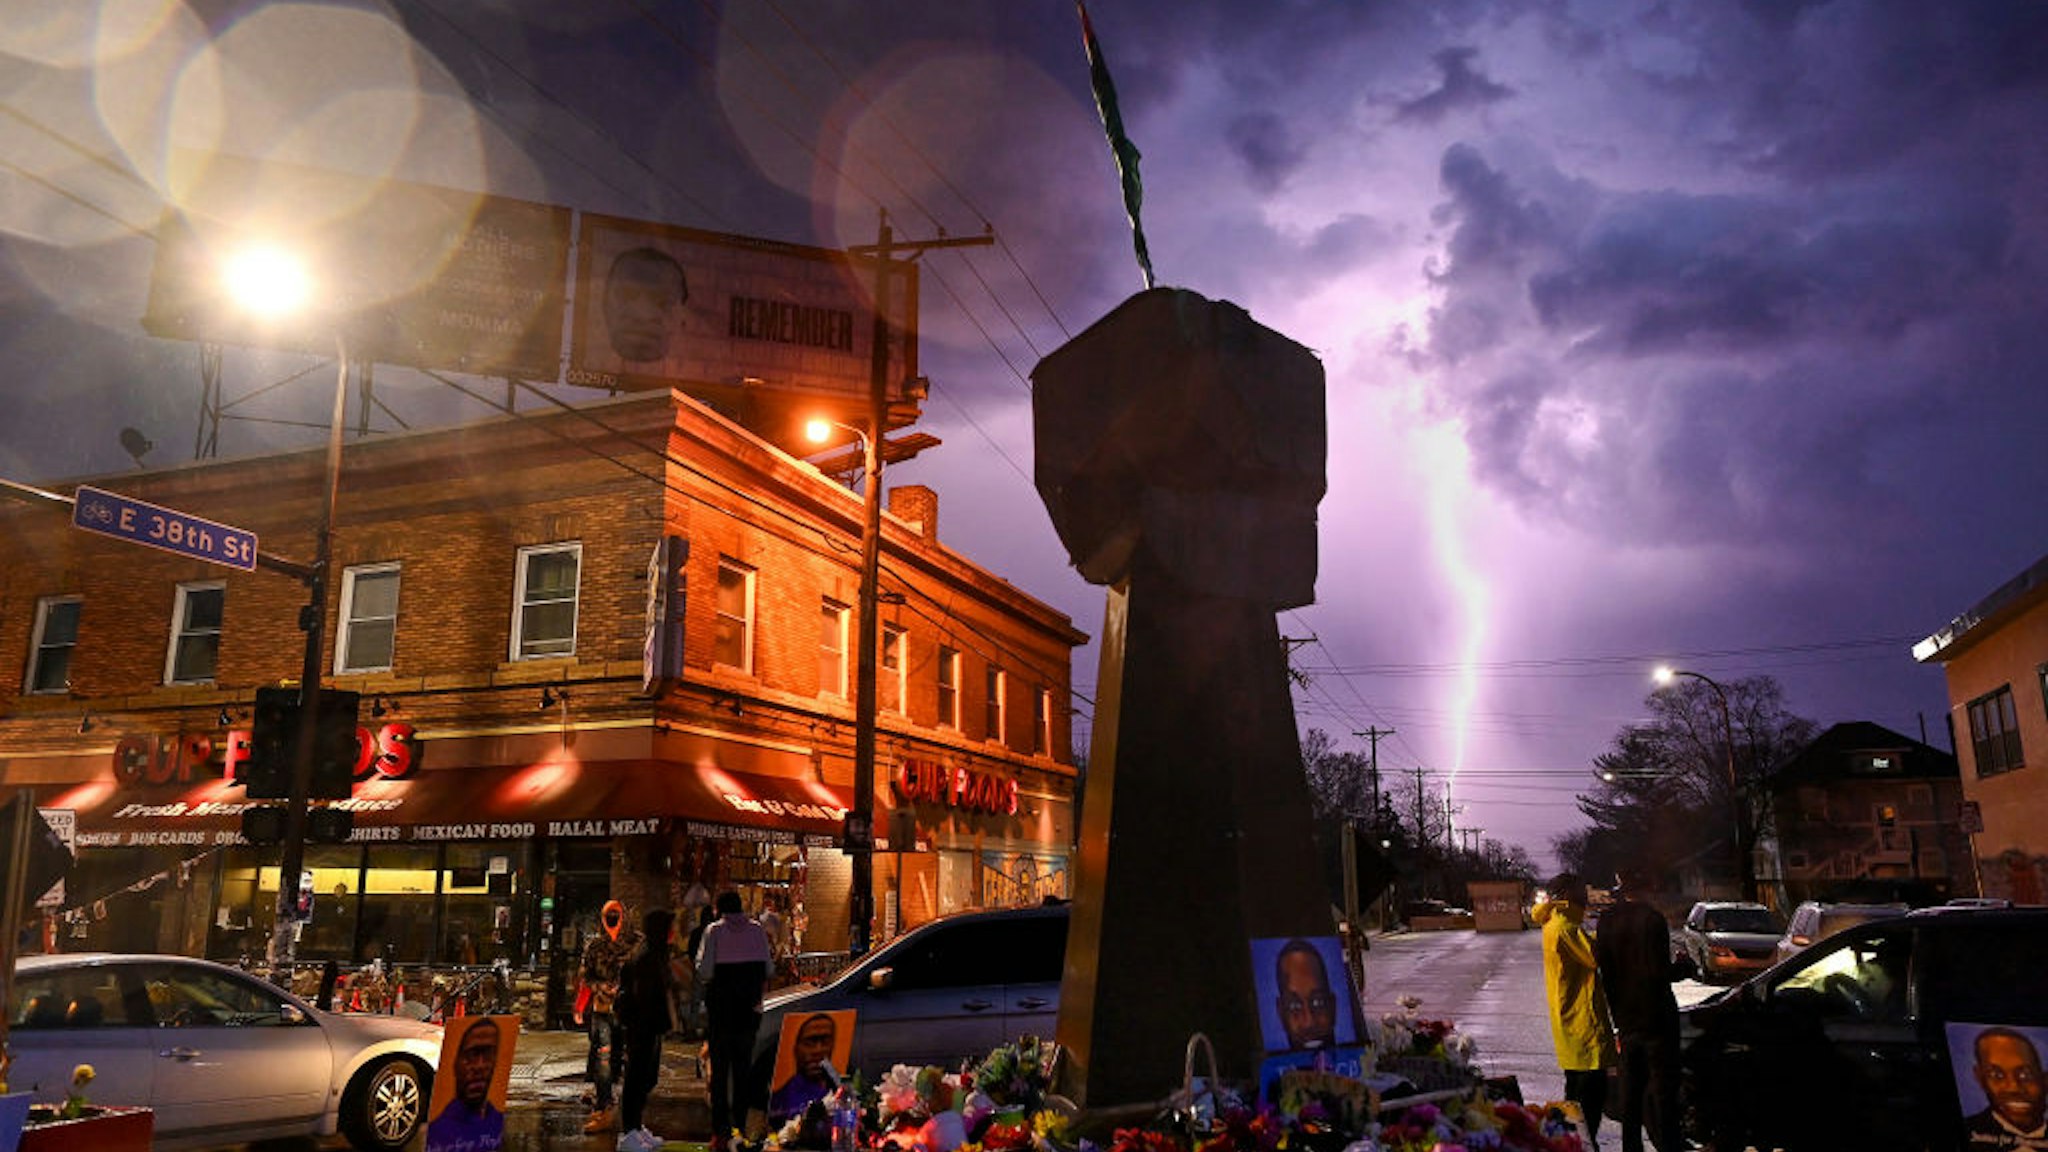 MINNEAPOLIS, MN - APRIL 6: Lighting strikes near the intersection of Chicago Avenue and 38th Street, also know as George Floyd Square on April 6, 2021 in Minneapolis, Minnesota.